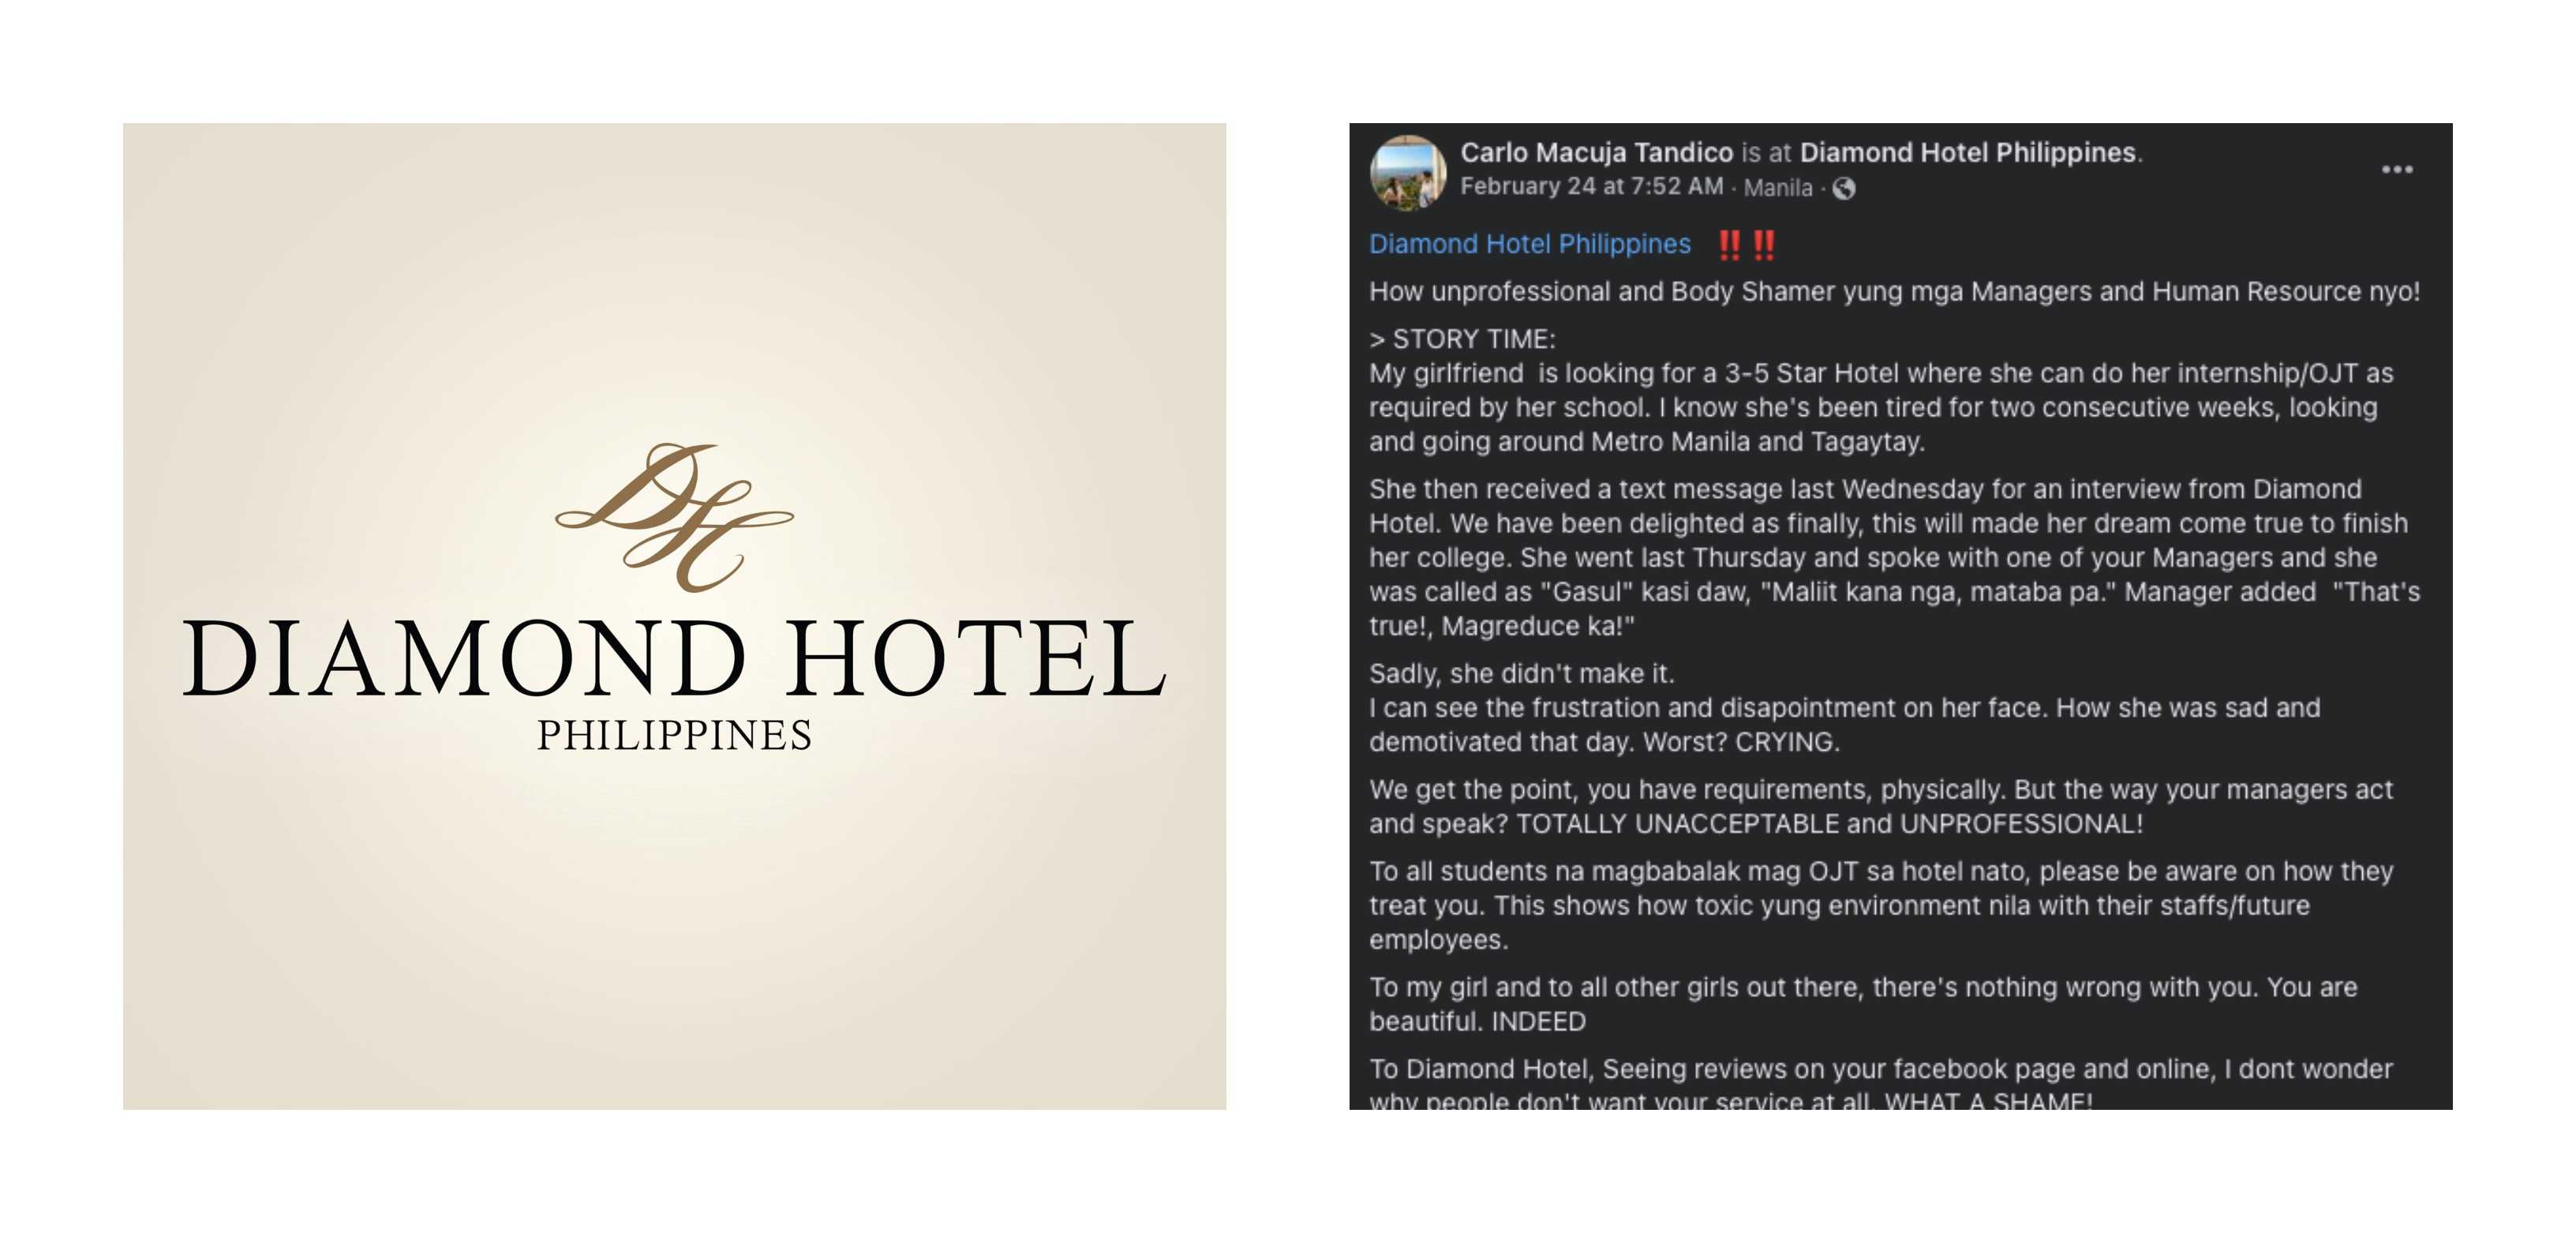 Diamond Hotel to investigate alleged body shaming issue